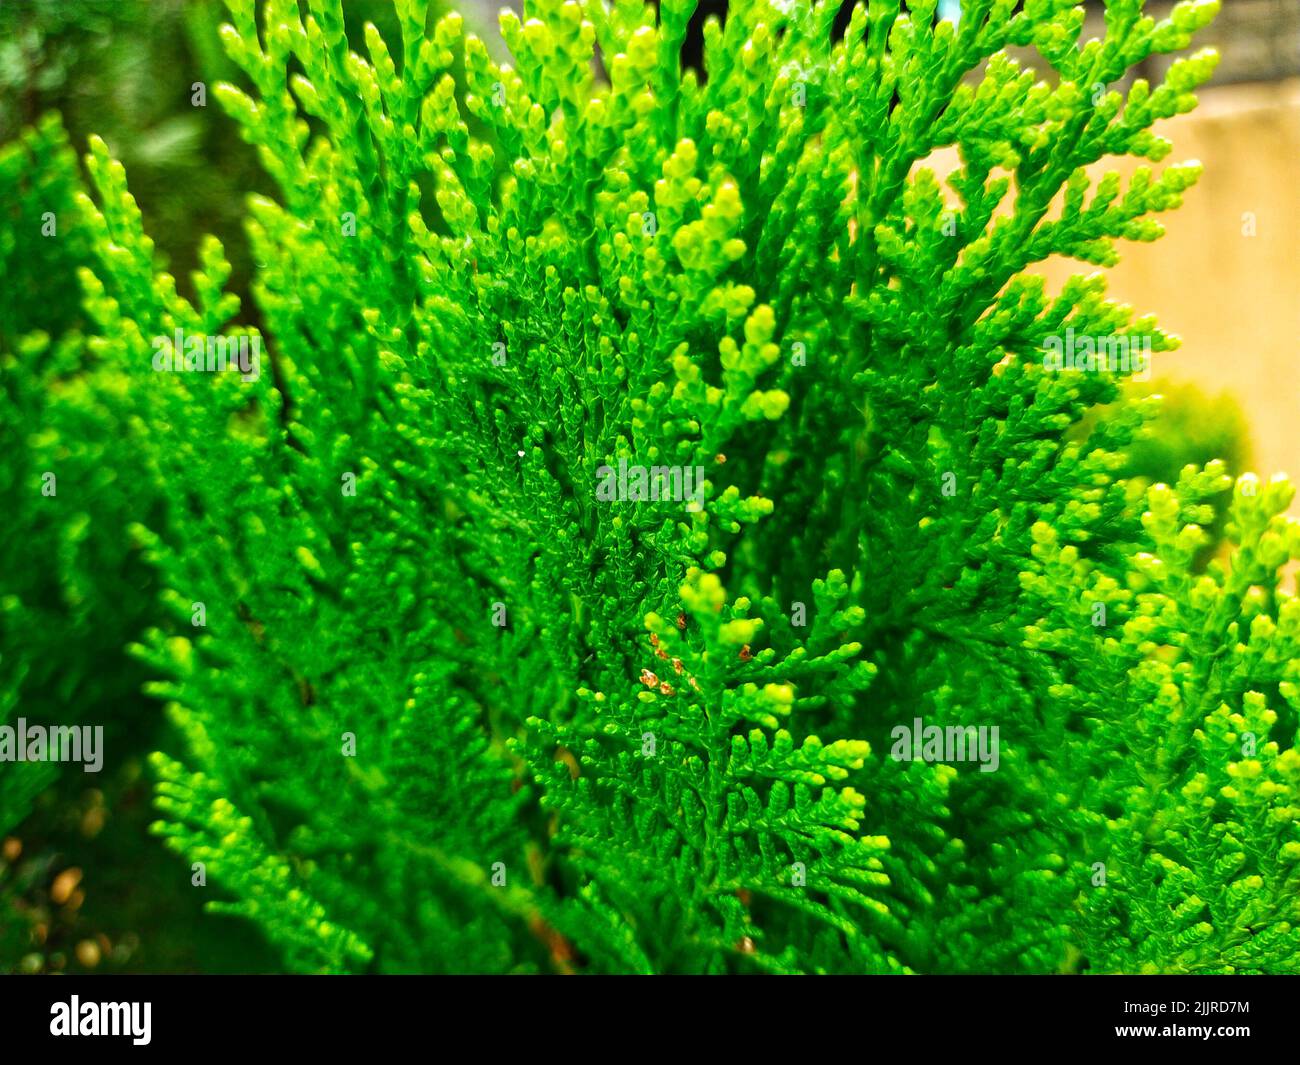 The leaves of the Thuja plant species Stock Photo